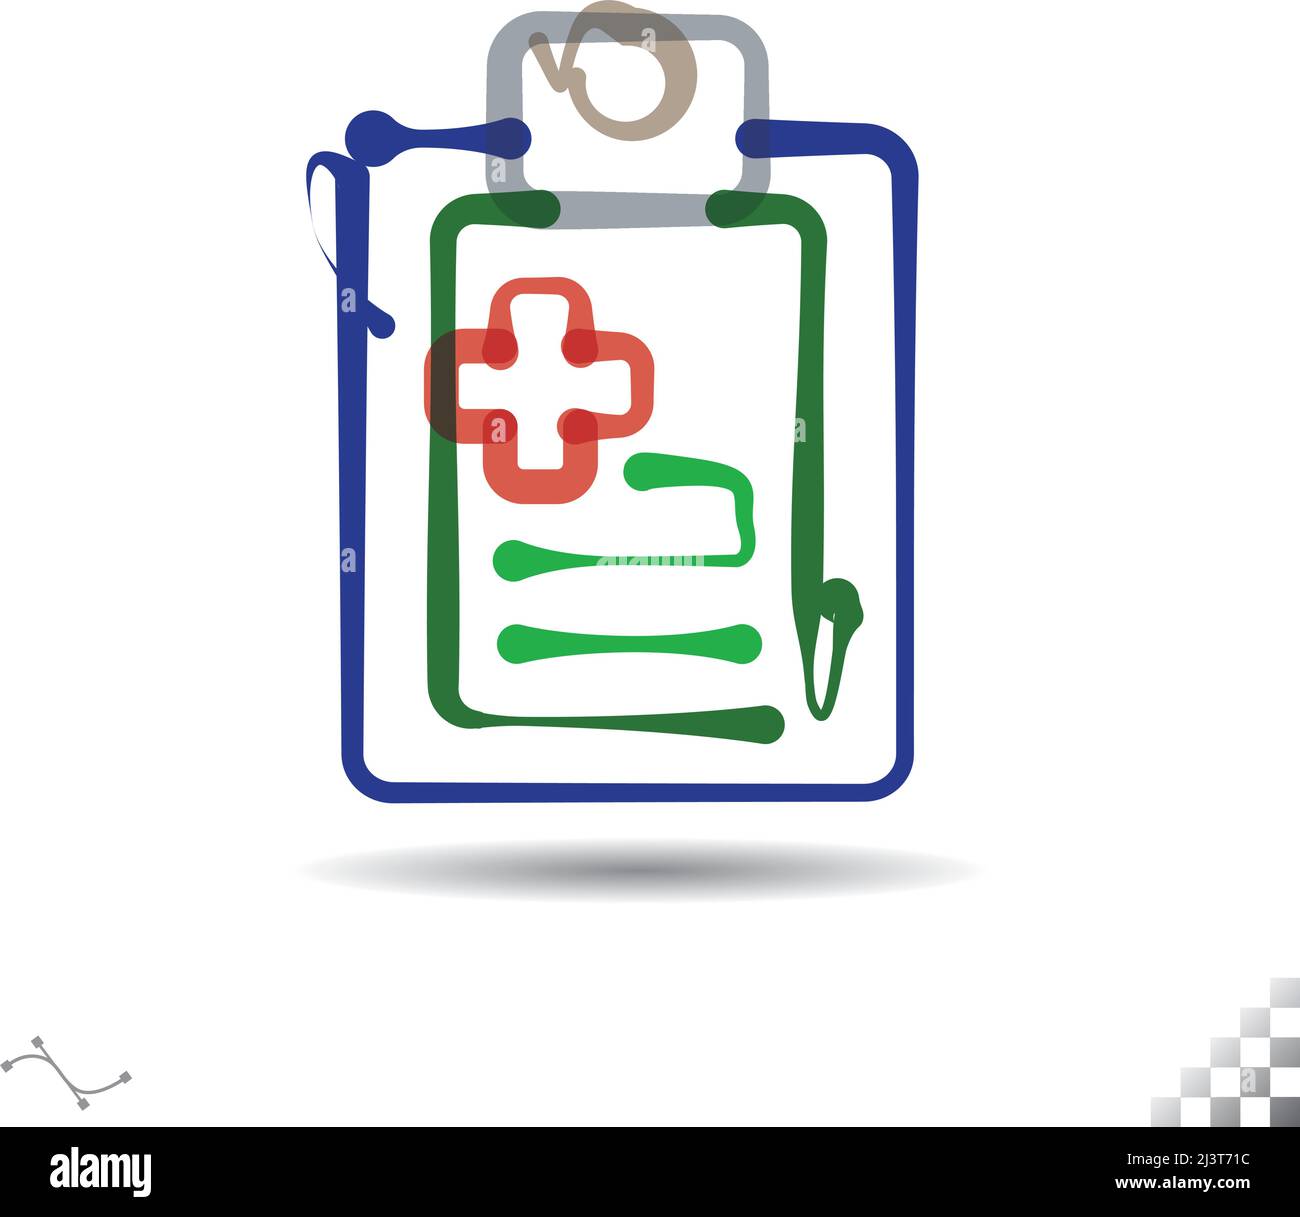 Clipboard icon symbol insignia with organic multicolor thick and thin line design with a plus symbol of health and prescription or medical form or 'notes Stock Vector